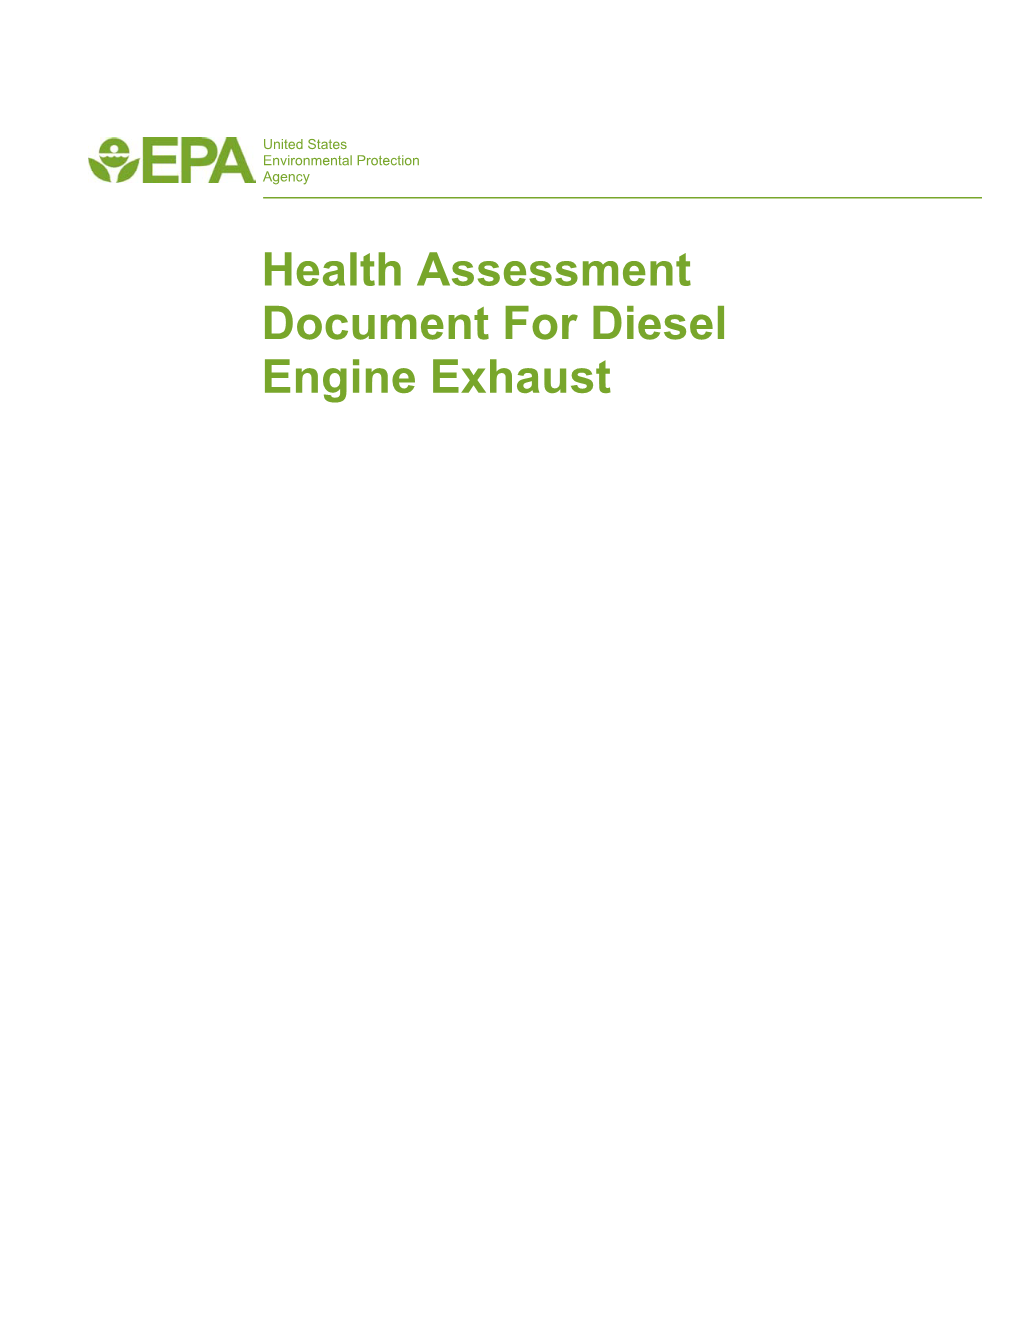 Health Assessment Document for Diesel Engine Exhaust EPA/600/8-90/057F May 2002